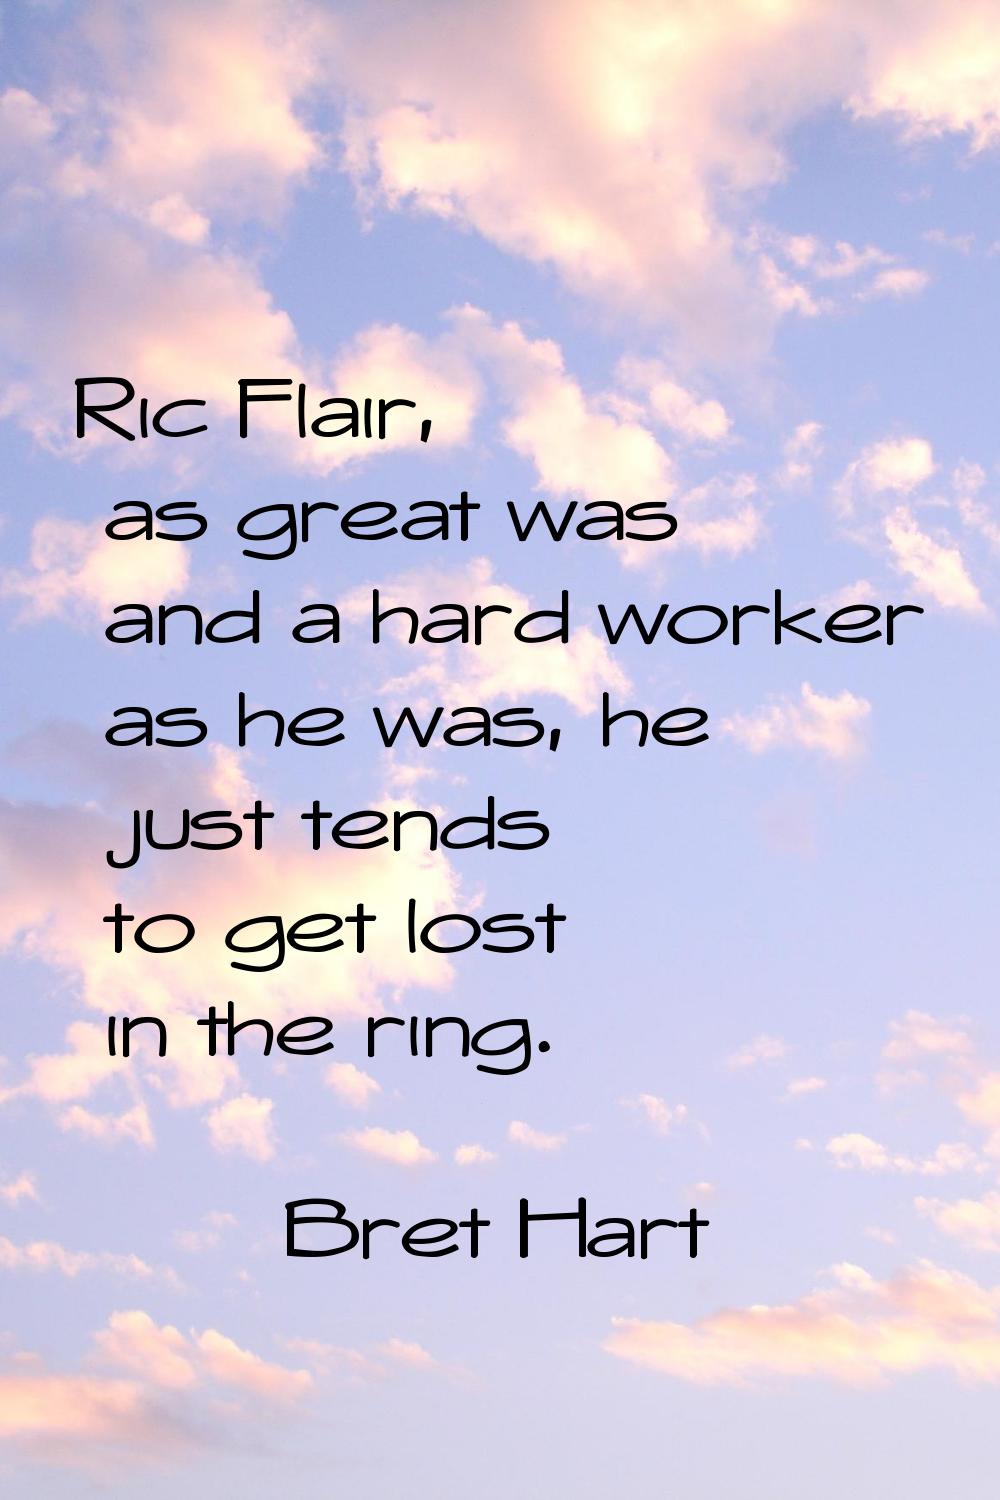 Ric Flair, as great was and a hard worker as he was, he just tends to get lost in the ring.